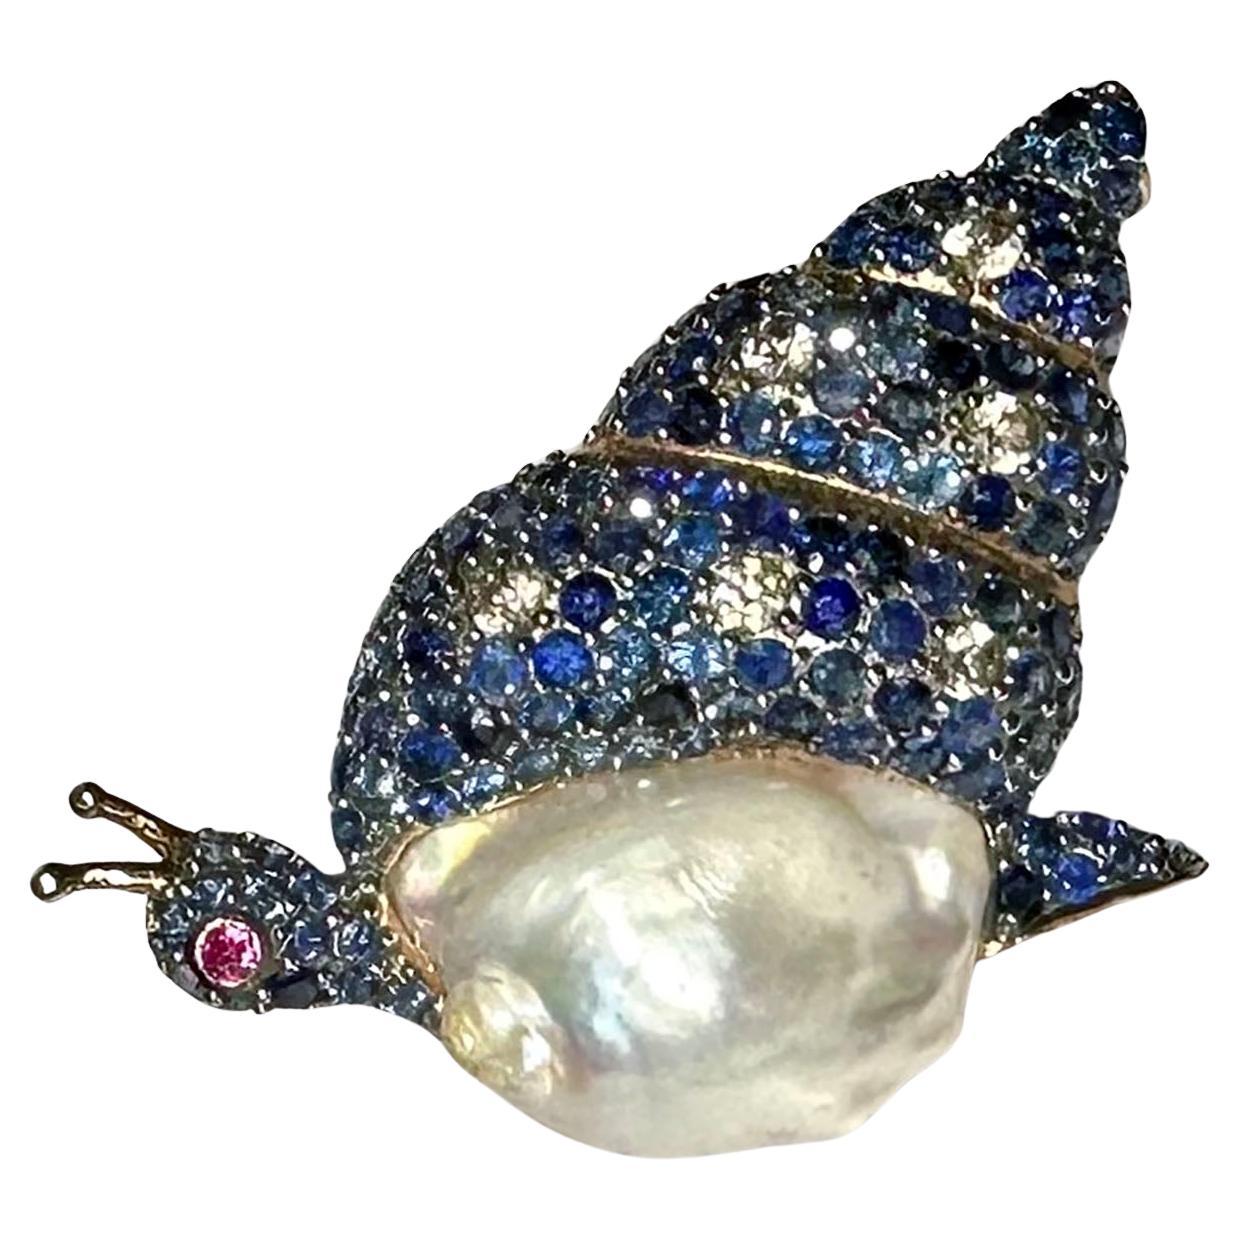 Blackened and Rose Gold Plated Silver Snail Brooch/Pendant For Sale